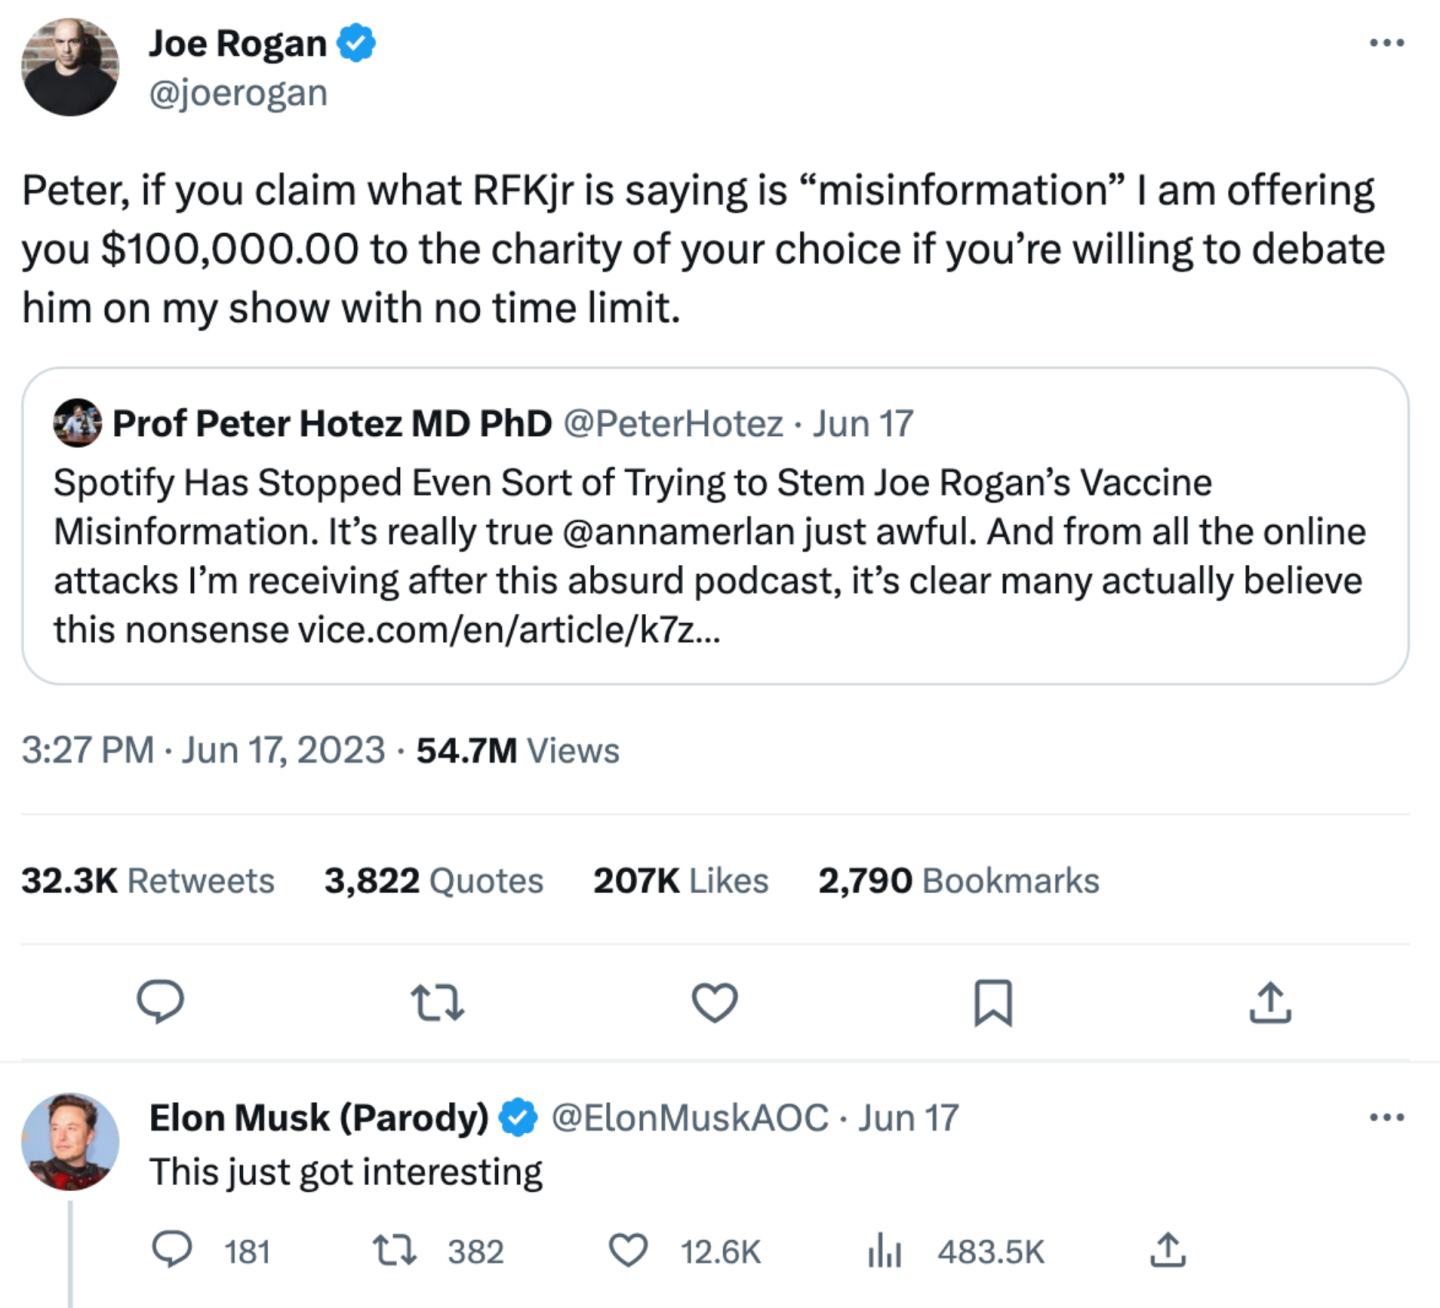 An image of a tweet from Joe Rogan with a reply from Elon Musk